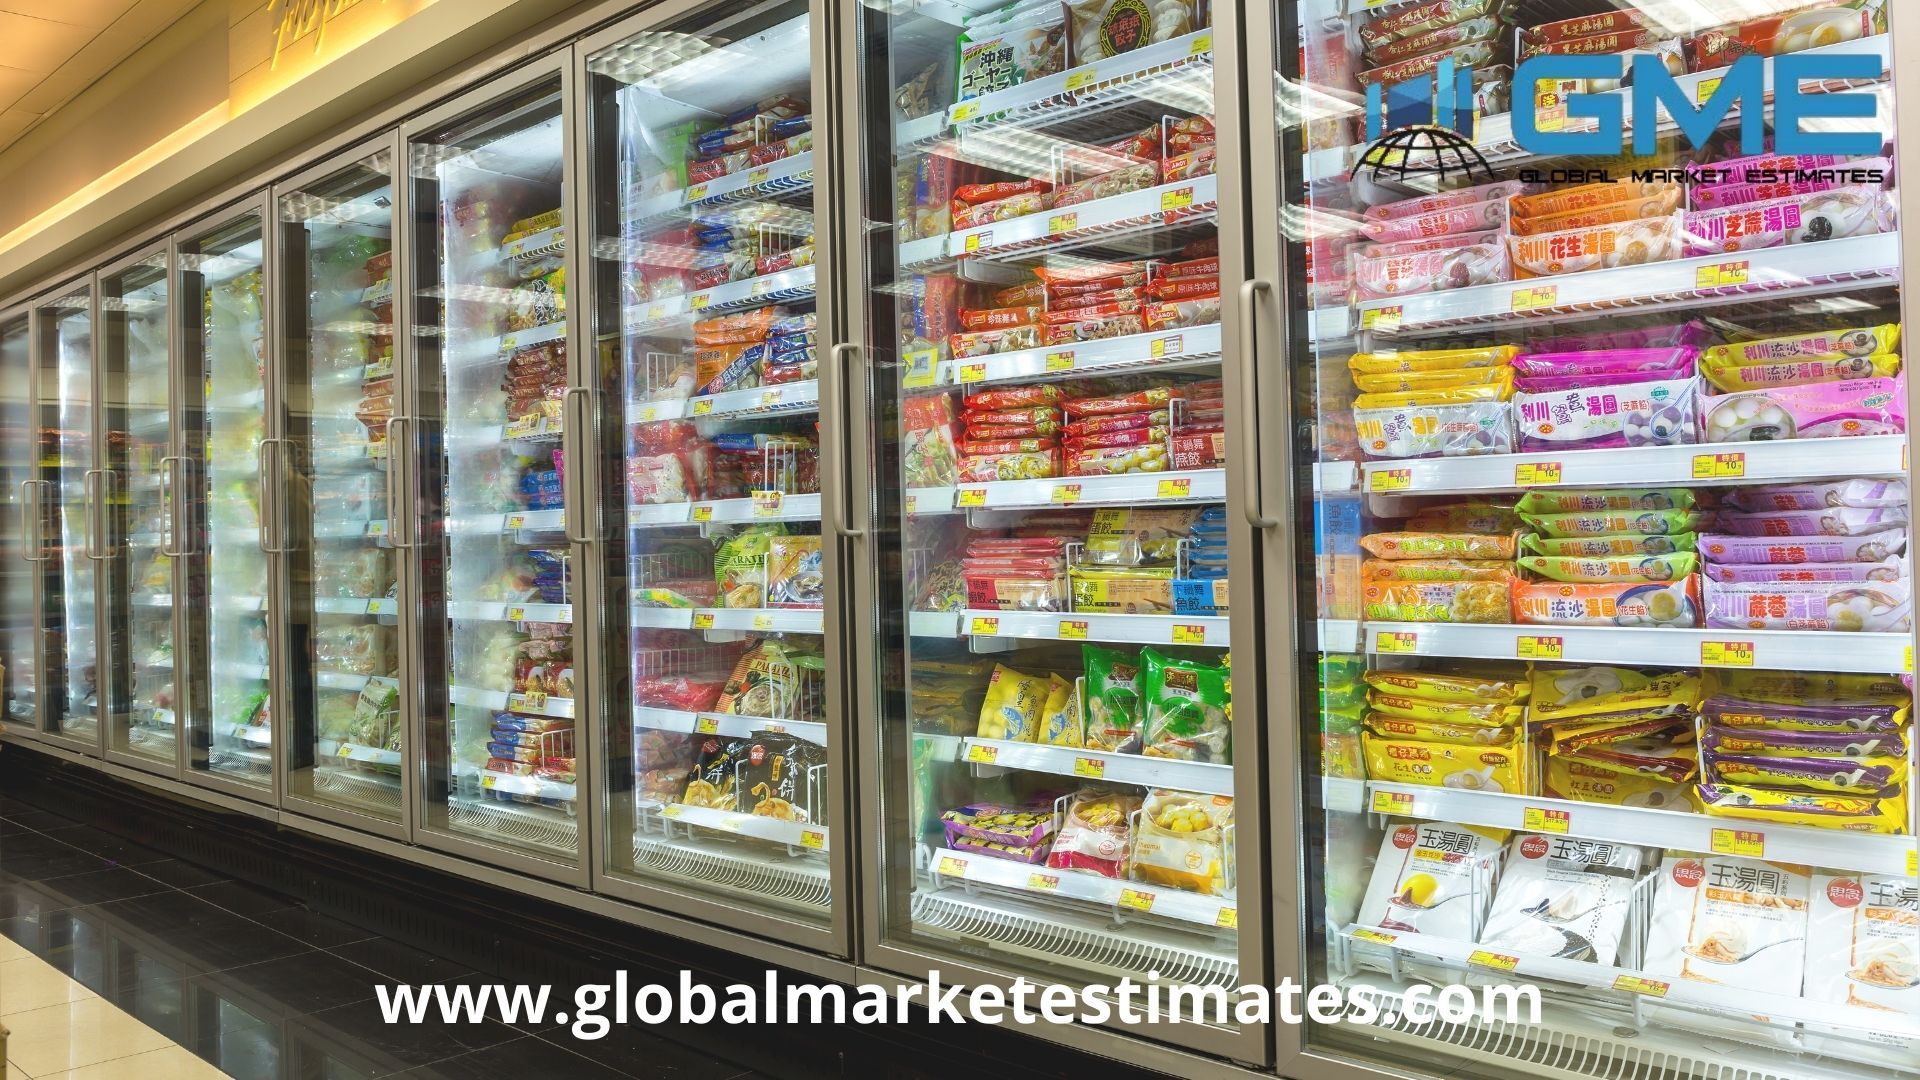 What is warming up in the Global Cold Chain market?